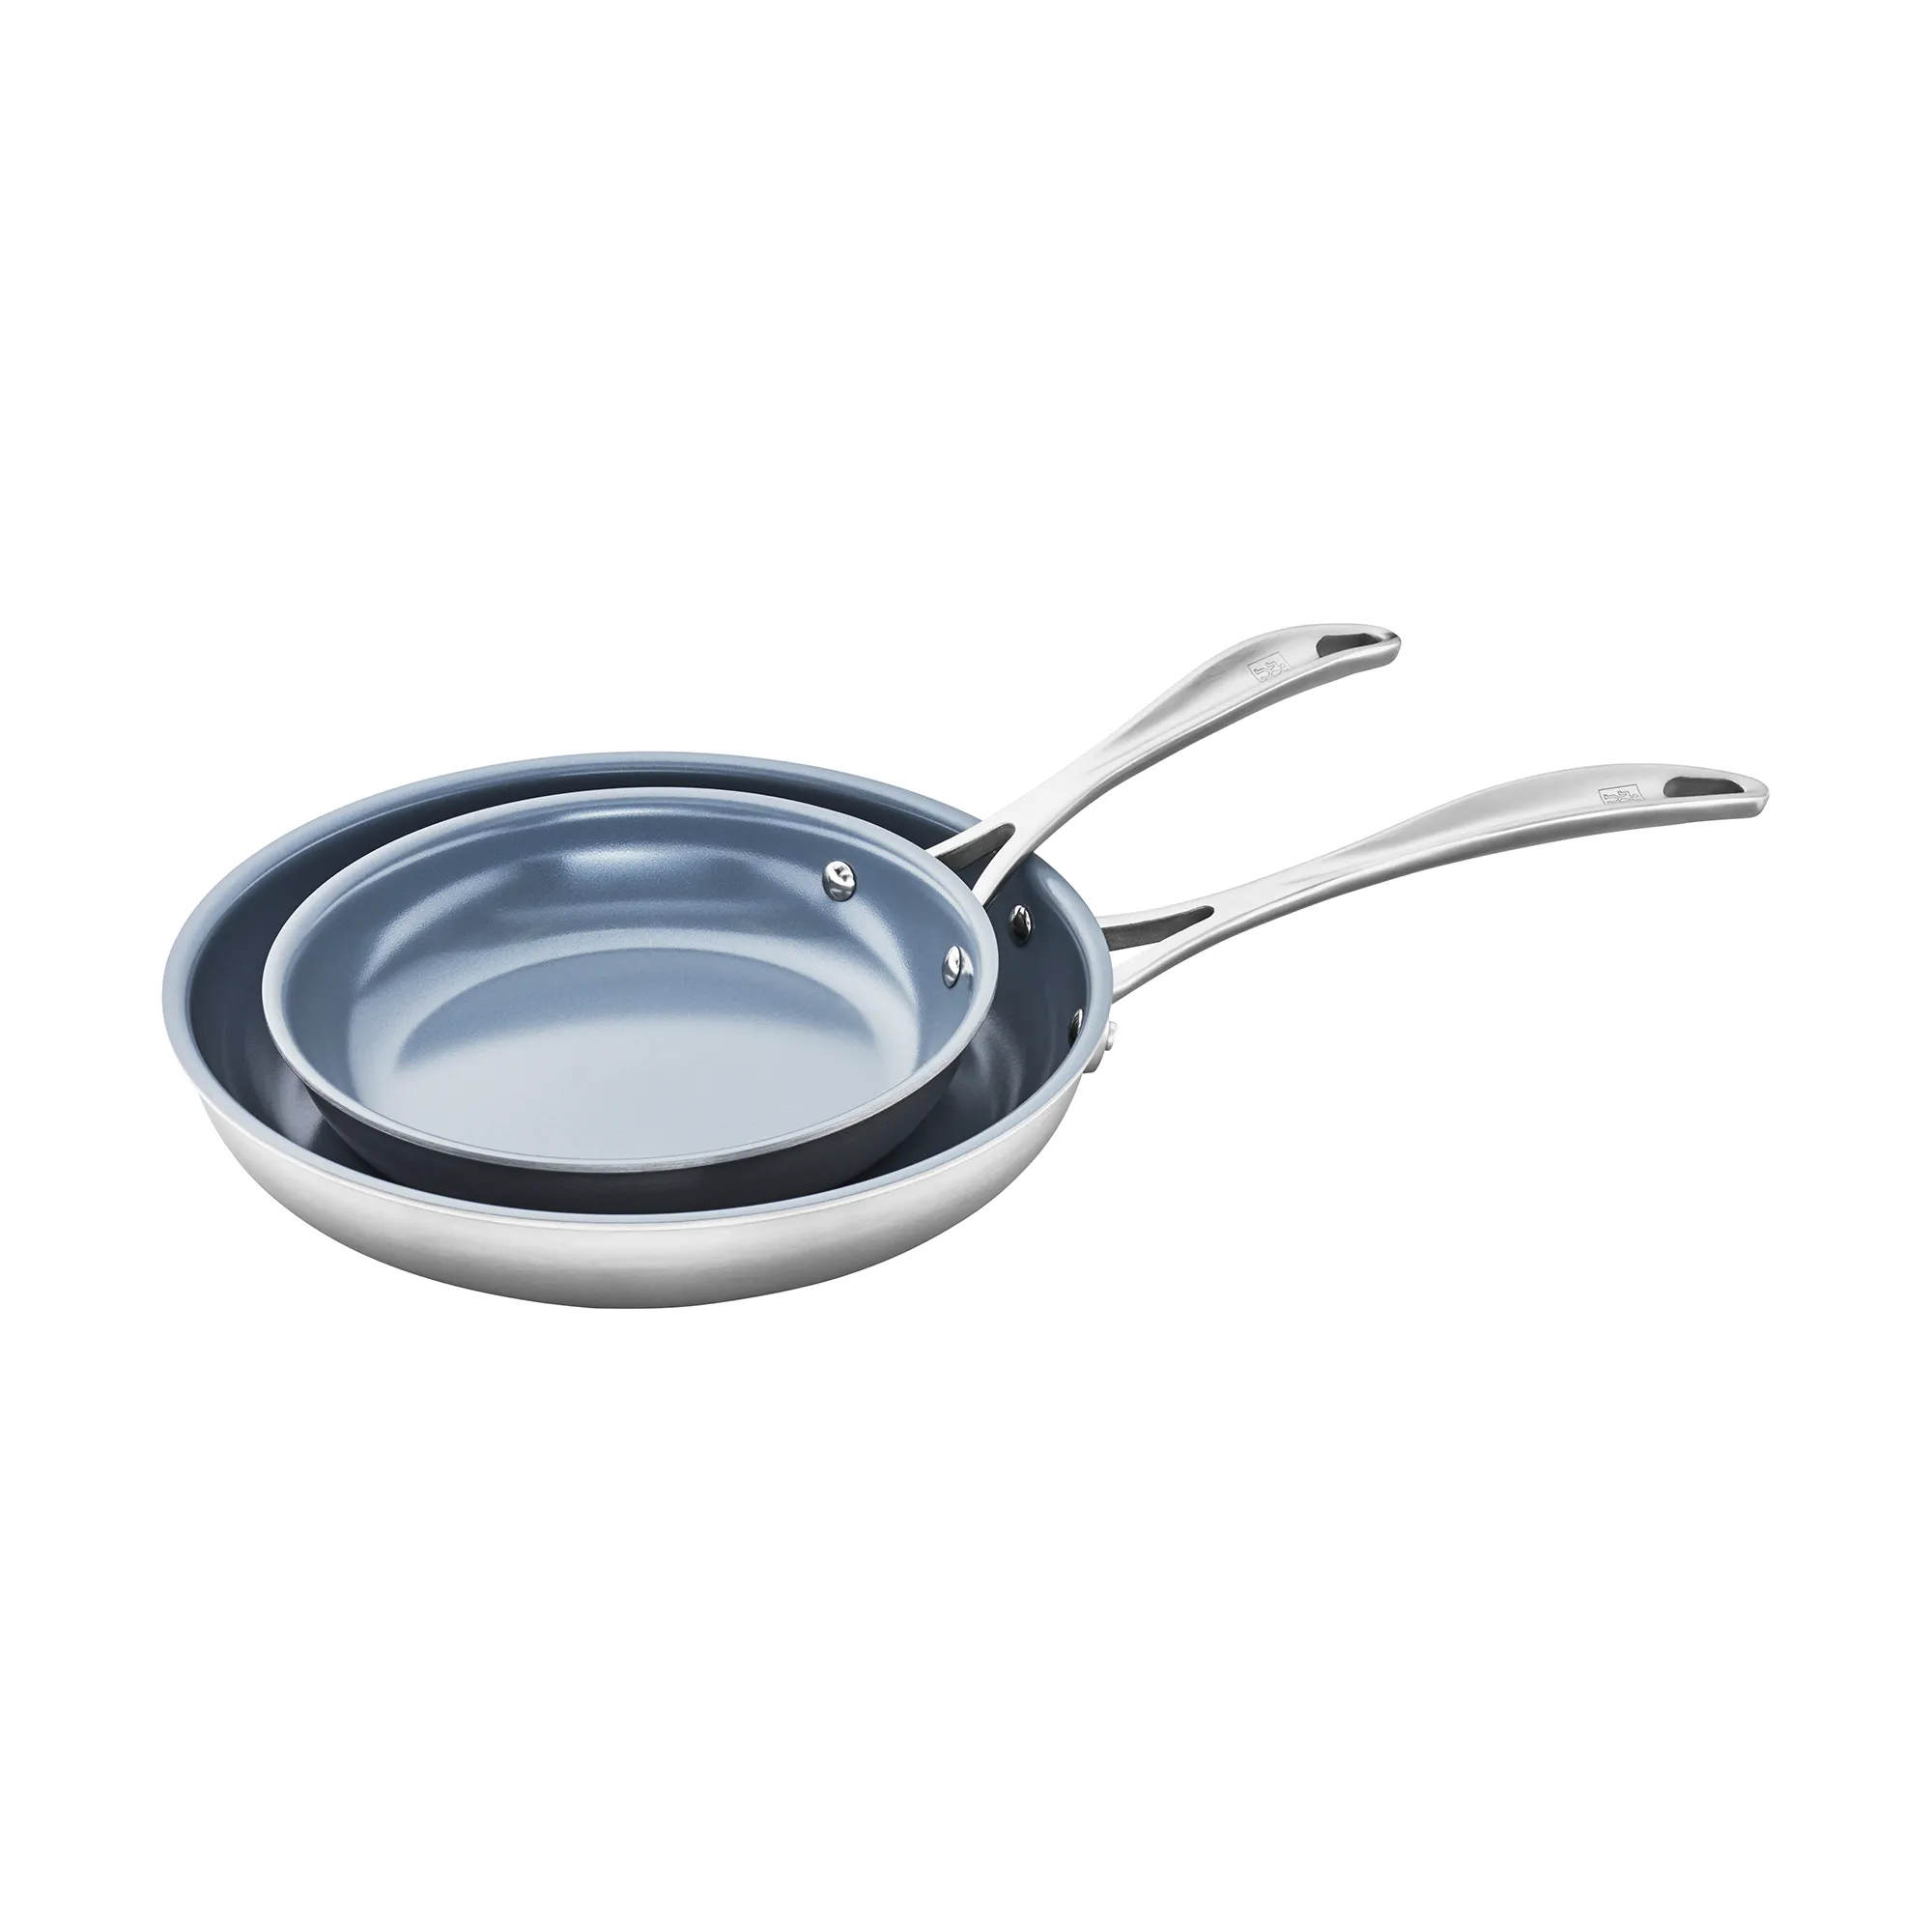 Zwilling Spirit 3-Ply 2 qt, Stainless Steel, Sauce Pan